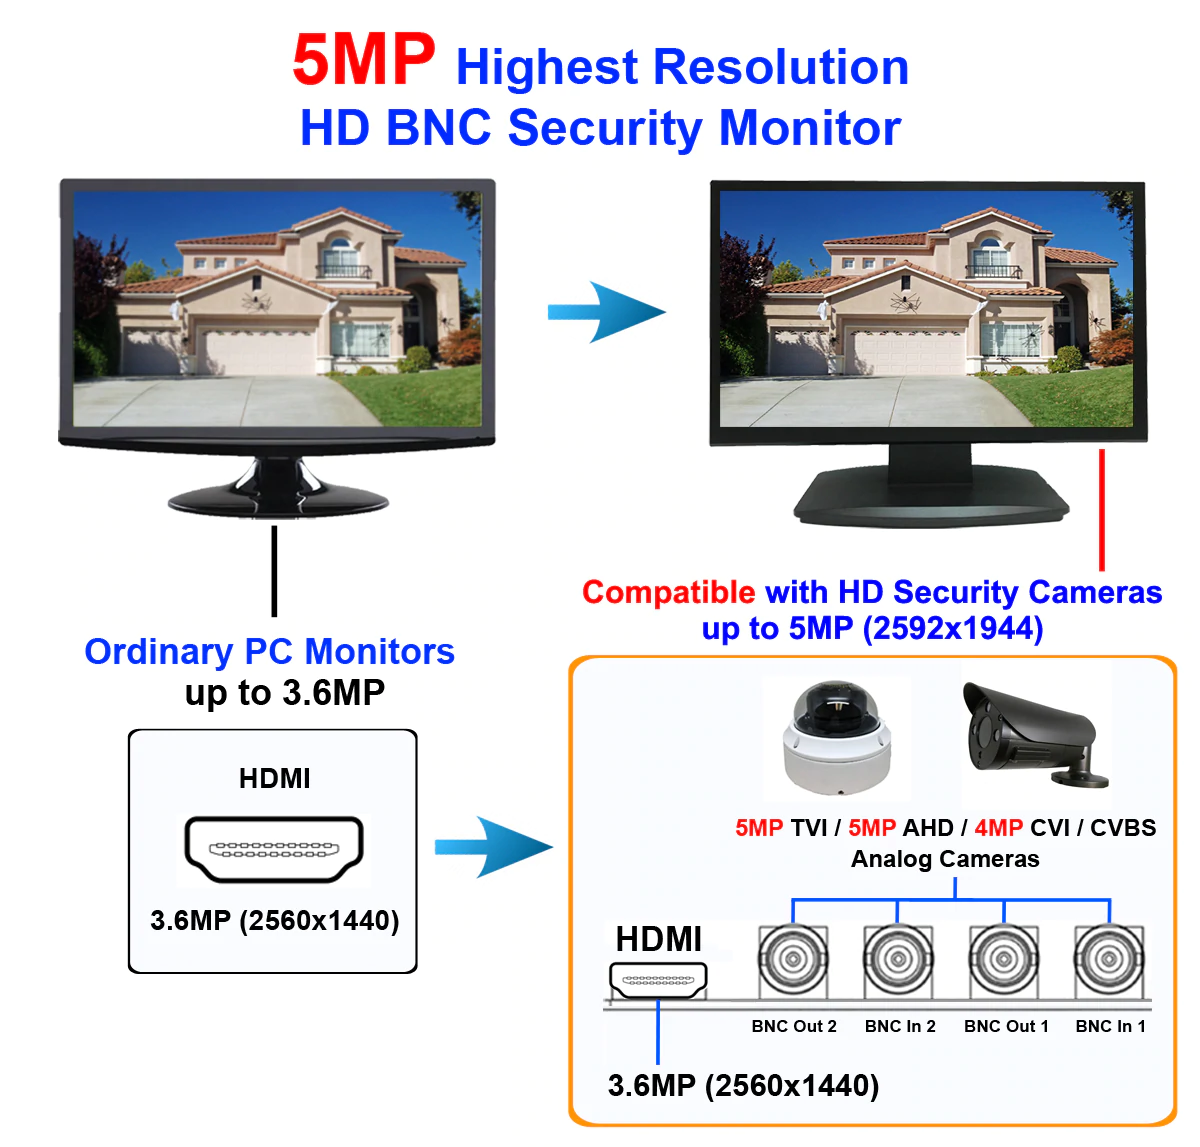 [NEW] [AP-HD236] 23.6" ANALOG HD OVER BNC CONNECTION, PERFECT MONITOR FOR APPLICATION WITHOUT DVR, PROFESSIONAL LED SECURITY MONITOR DIRECTLY WORK WITH HD-TVI, AHD, CVI & CVBS CAMERA, 1X HDMI & 2X BNC INPUTS FOR CCTV DVR HOME OFFICE SURVEILLANCE SYSTEM